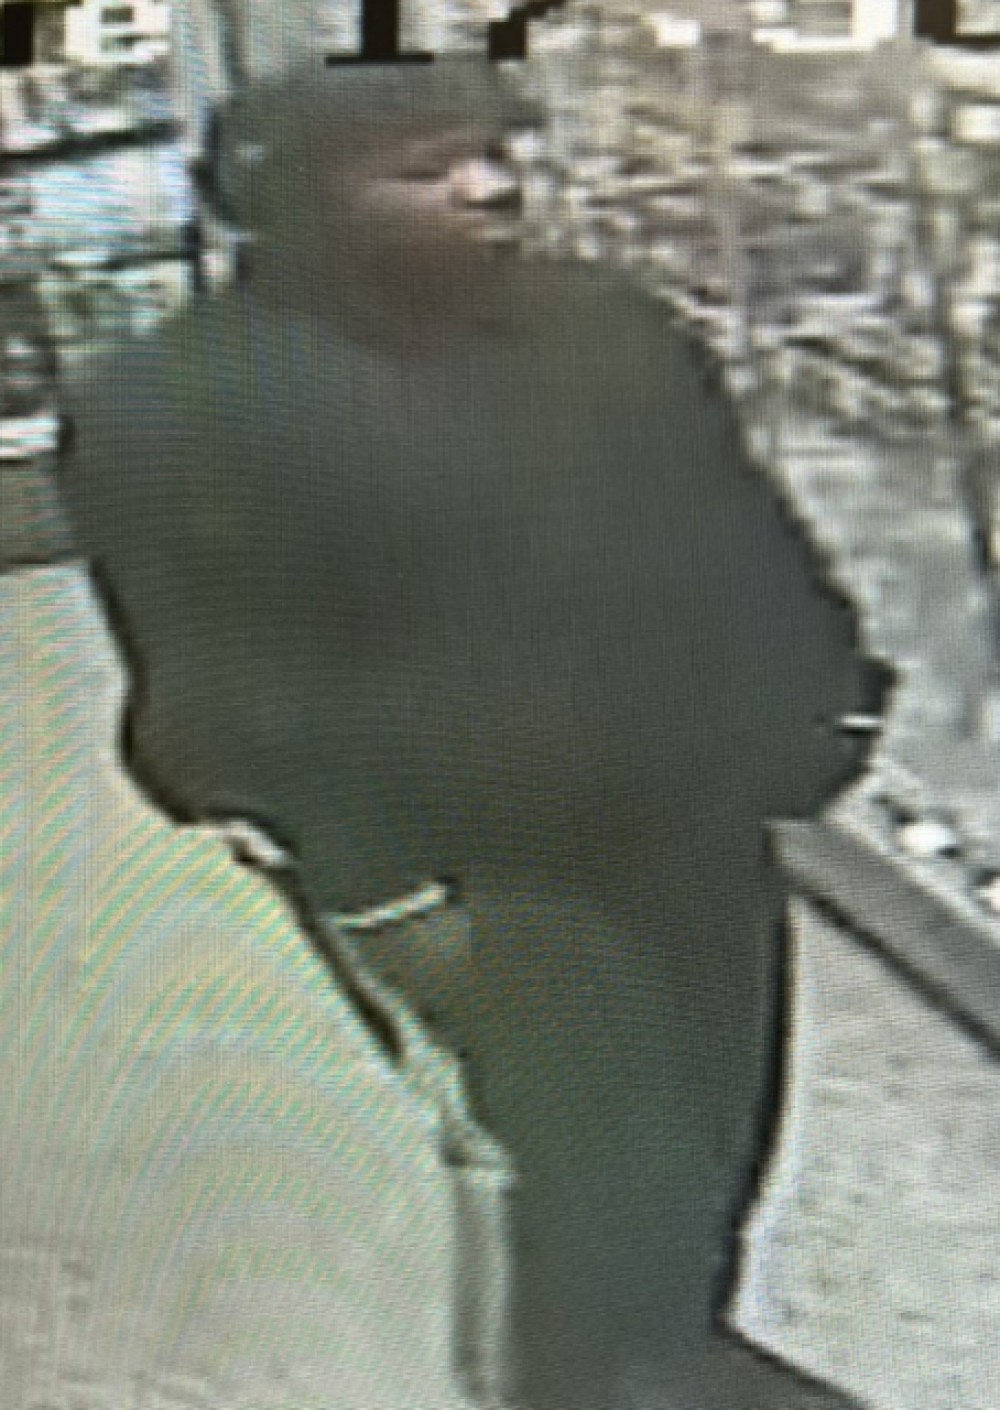 CCTV appeal after theft in Letchworth Garden City. Do you recognise this man? 